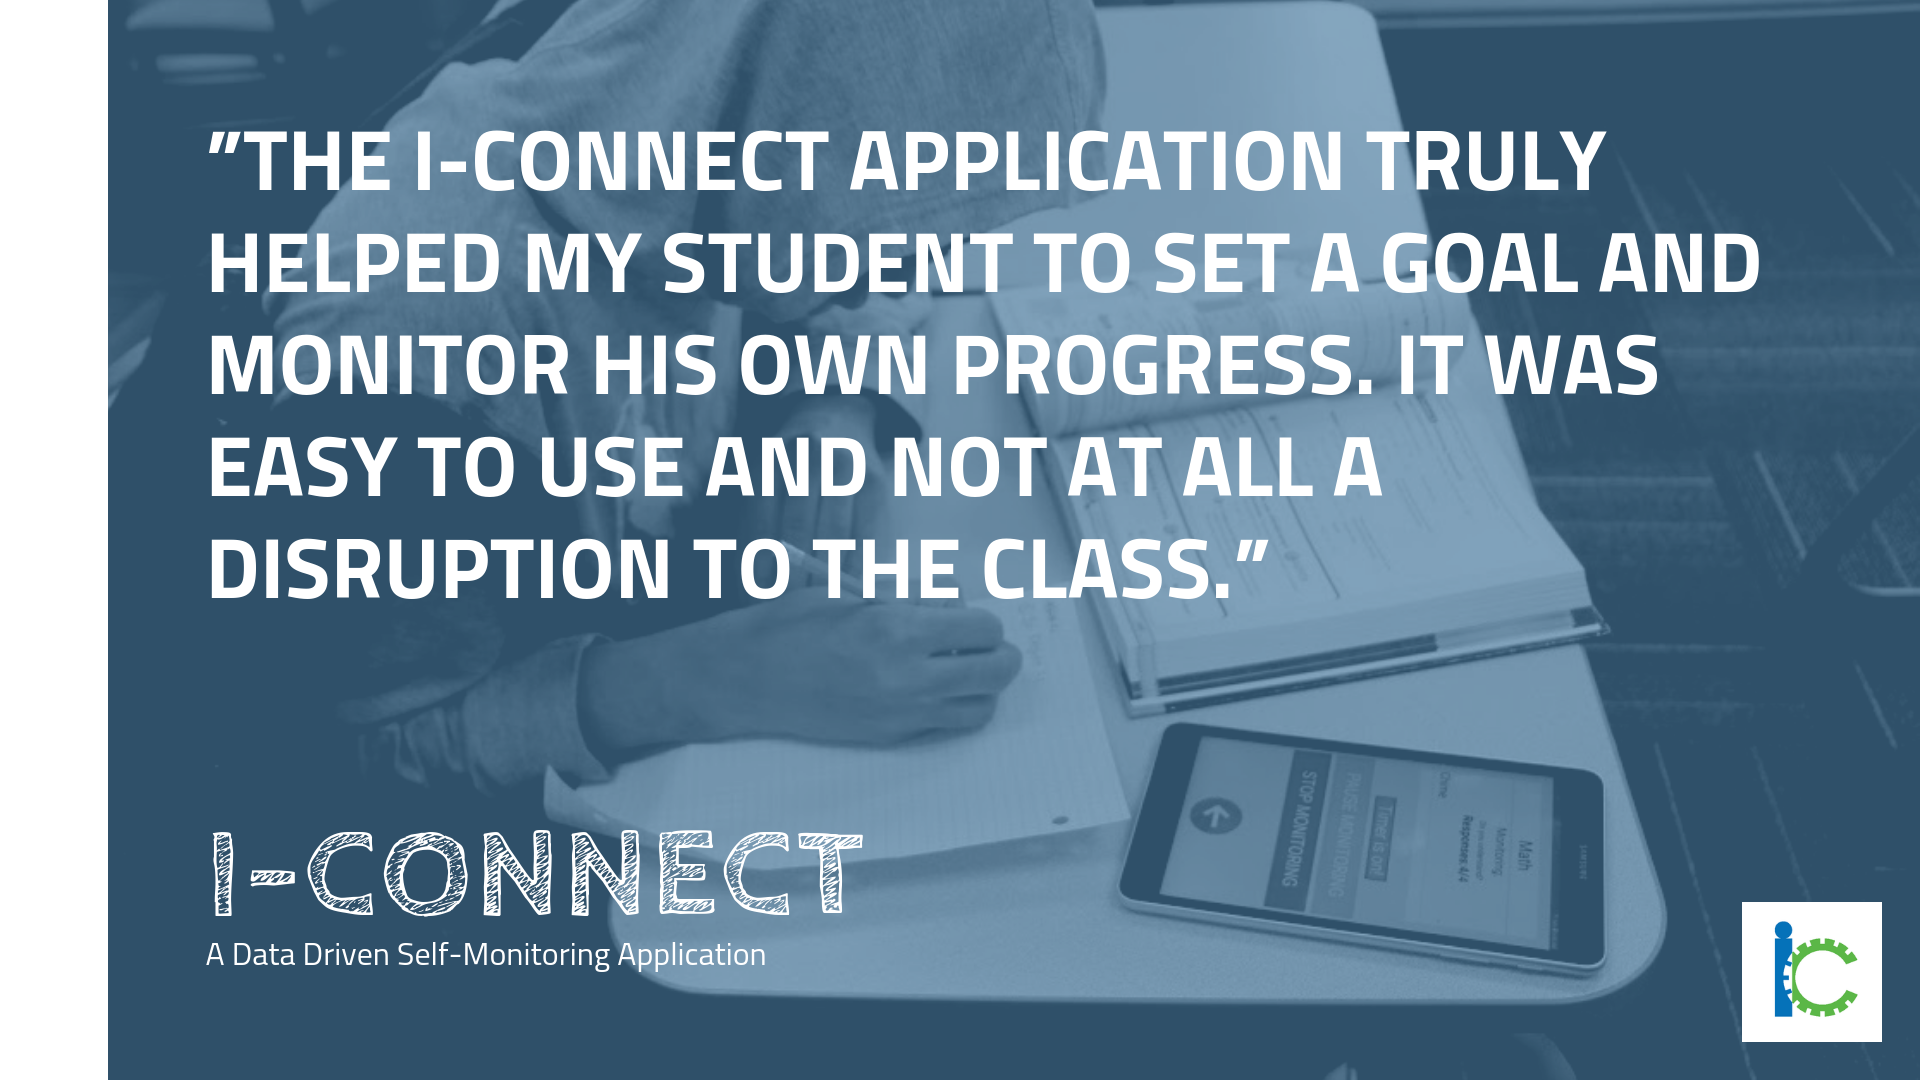 Image read, "The I-Connect Application truly helped my student to set a goal and monitor his own progress. It was easy to use and not at all a disruption to the class."